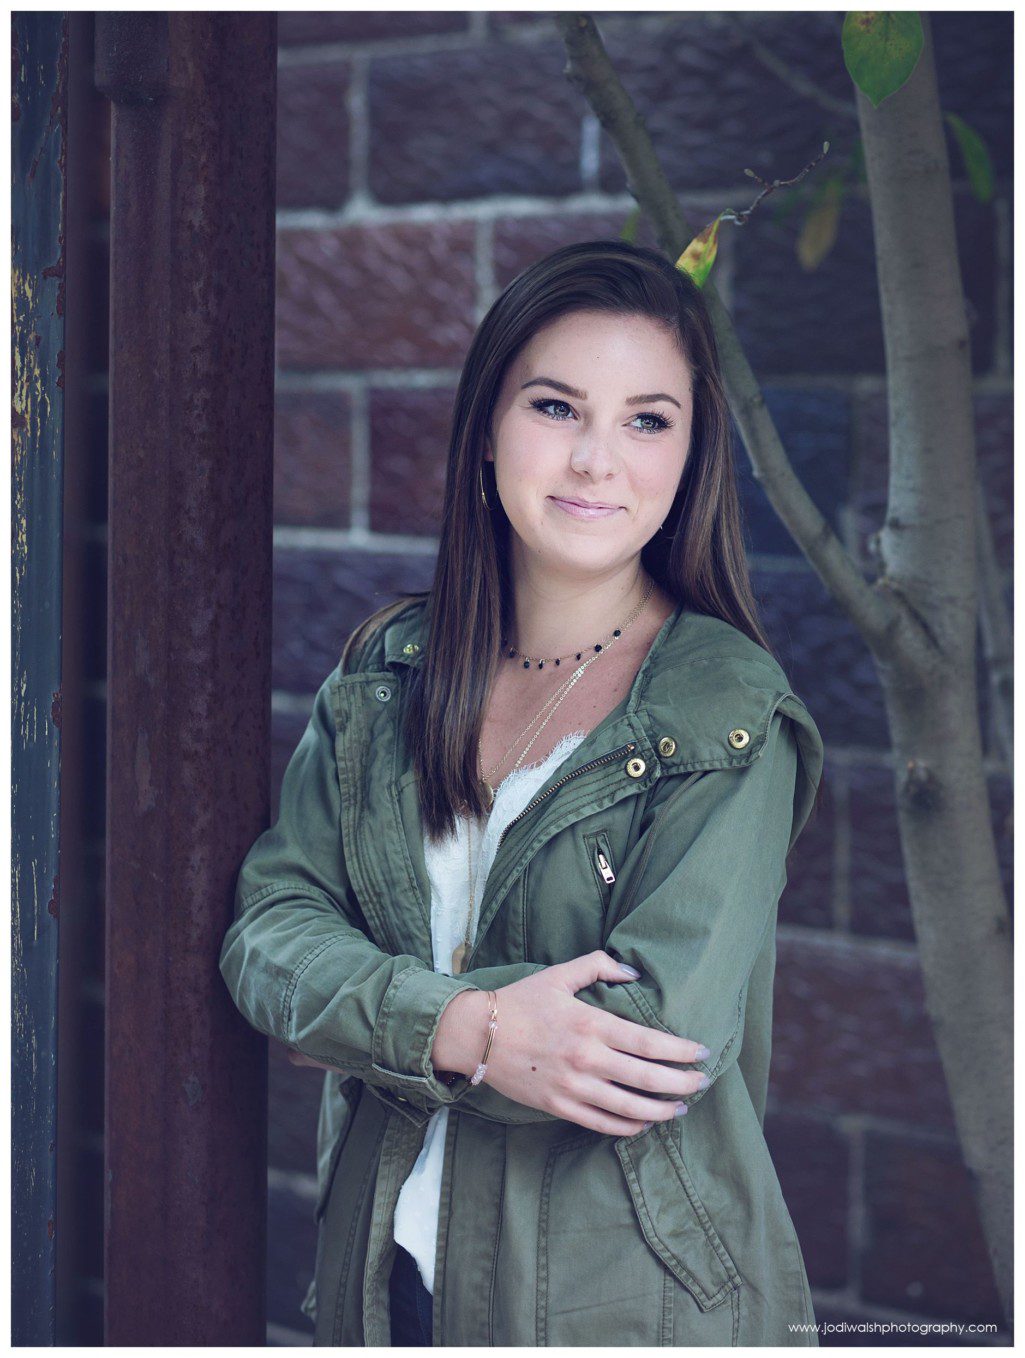 small-town senior portrait session in Sewickley.  Image of a senior girl wearing a green cargo jacket, standing in a doorway